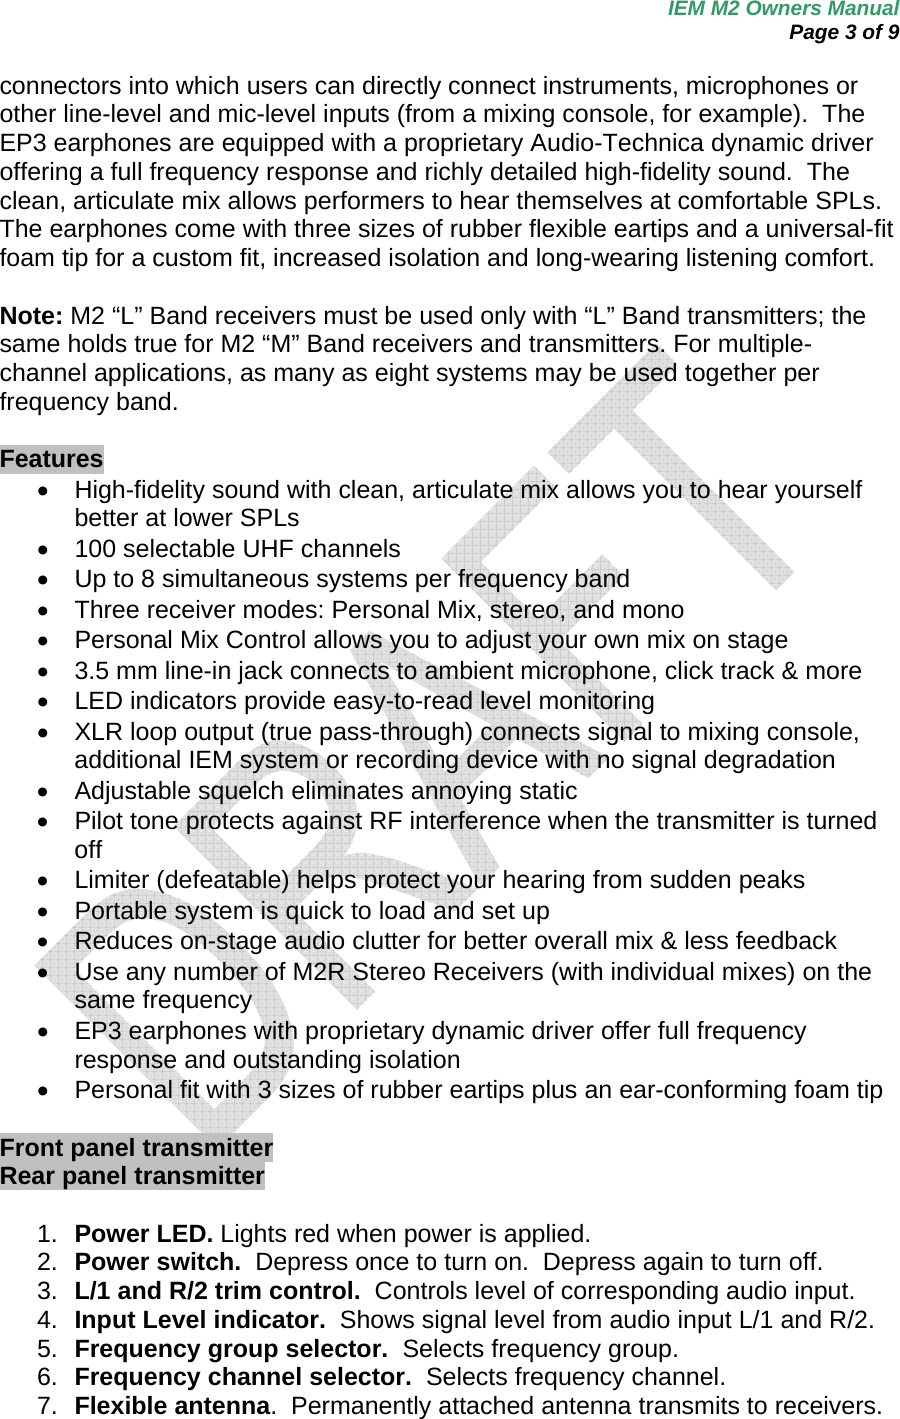 IEM M2 Owners Manual  Page 3 of 9  connectors into which users can directly connect instruments, microphones or other line-level and mic-level inputs (from a mixing console, for example).  The EP3 earphones are equipped with a proprietary Audio-Technica dynamic driver offering a full frequency response and richly detailed high-fidelity sound.  The clean, articulate mix allows performers to hear themselves at comfortable SPLs.  The earphones come with three sizes of rubber flexible eartips and a universal-fit foam tip for a custom fit, increased isolation and long-wearing listening comfort.  Note: M2 “L” Band receivers must be used only with “L” Band transmitters; the same holds true for M2 “M” Band receivers and transmitters. For multiple-channel applications, as many as eight systems may be used together per frequency band.  Features •  High-fidelity sound with clean, articulate mix allows you to hear yourself better at lower SPLs   •  100 selectable UHF channels  •  Up to 8 simultaneous systems per frequency band •  Three receiver modes: Personal Mix, stereo, and mono •  Personal Mix Control allows you to adjust your own mix on stage •  3.5 mm line-in jack connects to ambient microphone, click track &amp; more •  LED indicators provide easy-to-read level monitoring •  XLR loop output (true pass-through) connects signal to mixing console, additional IEM system or recording device with no signal degradation •  Adjustable squelch eliminates annoying static  •  Pilot tone protects against RF interference when the transmitter is turned off •  Limiter (defeatable) helps protect your hearing from sudden peaks •  Portable system is quick to load and set up  •  Reduces on-stage audio clutter for better overall mix &amp; less feedback •  Use any number of M2R Stereo Receivers (with individual mixes) on the same frequency  •  EP3 earphones with proprietary dynamic driver offer full frequency response and outstanding isolation •  Personal fit with 3 sizes of rubber eartips plus an ear-conforming foam tip  Front panel transmitter Rear panel transmitter    1.  Power LED. Lights red when power is applied. 2.  Power switch.  Depress once to turn on.  Depress again to turn off. 3.  L/1 and R/2 trim control.  Controls level of corresponding audio input. 4.  Input Level indicator.  Shows signal level from audio input L/1 and R/2.  5.  Frequency group selector.  Selects frequency group. 6.  Frequency channel selector.  Selects frequency channel. 7.  Flexible antenna.  Permanently attached antenna transmits to receivers. 